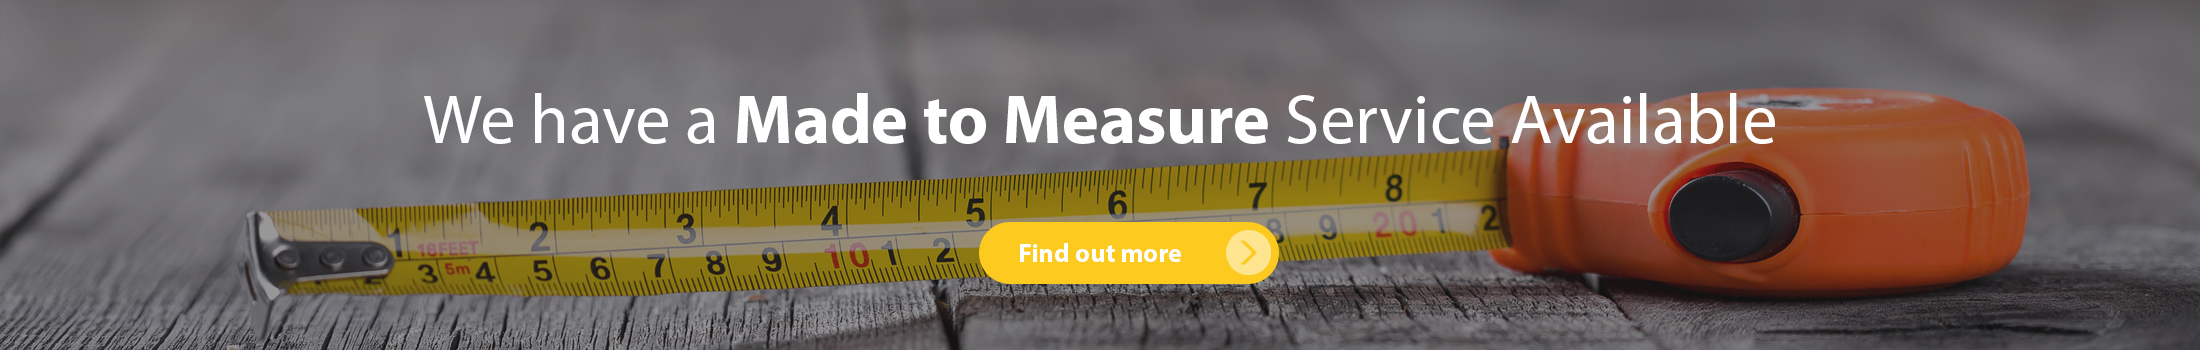 Discover more about our popular made to measure service - Click here